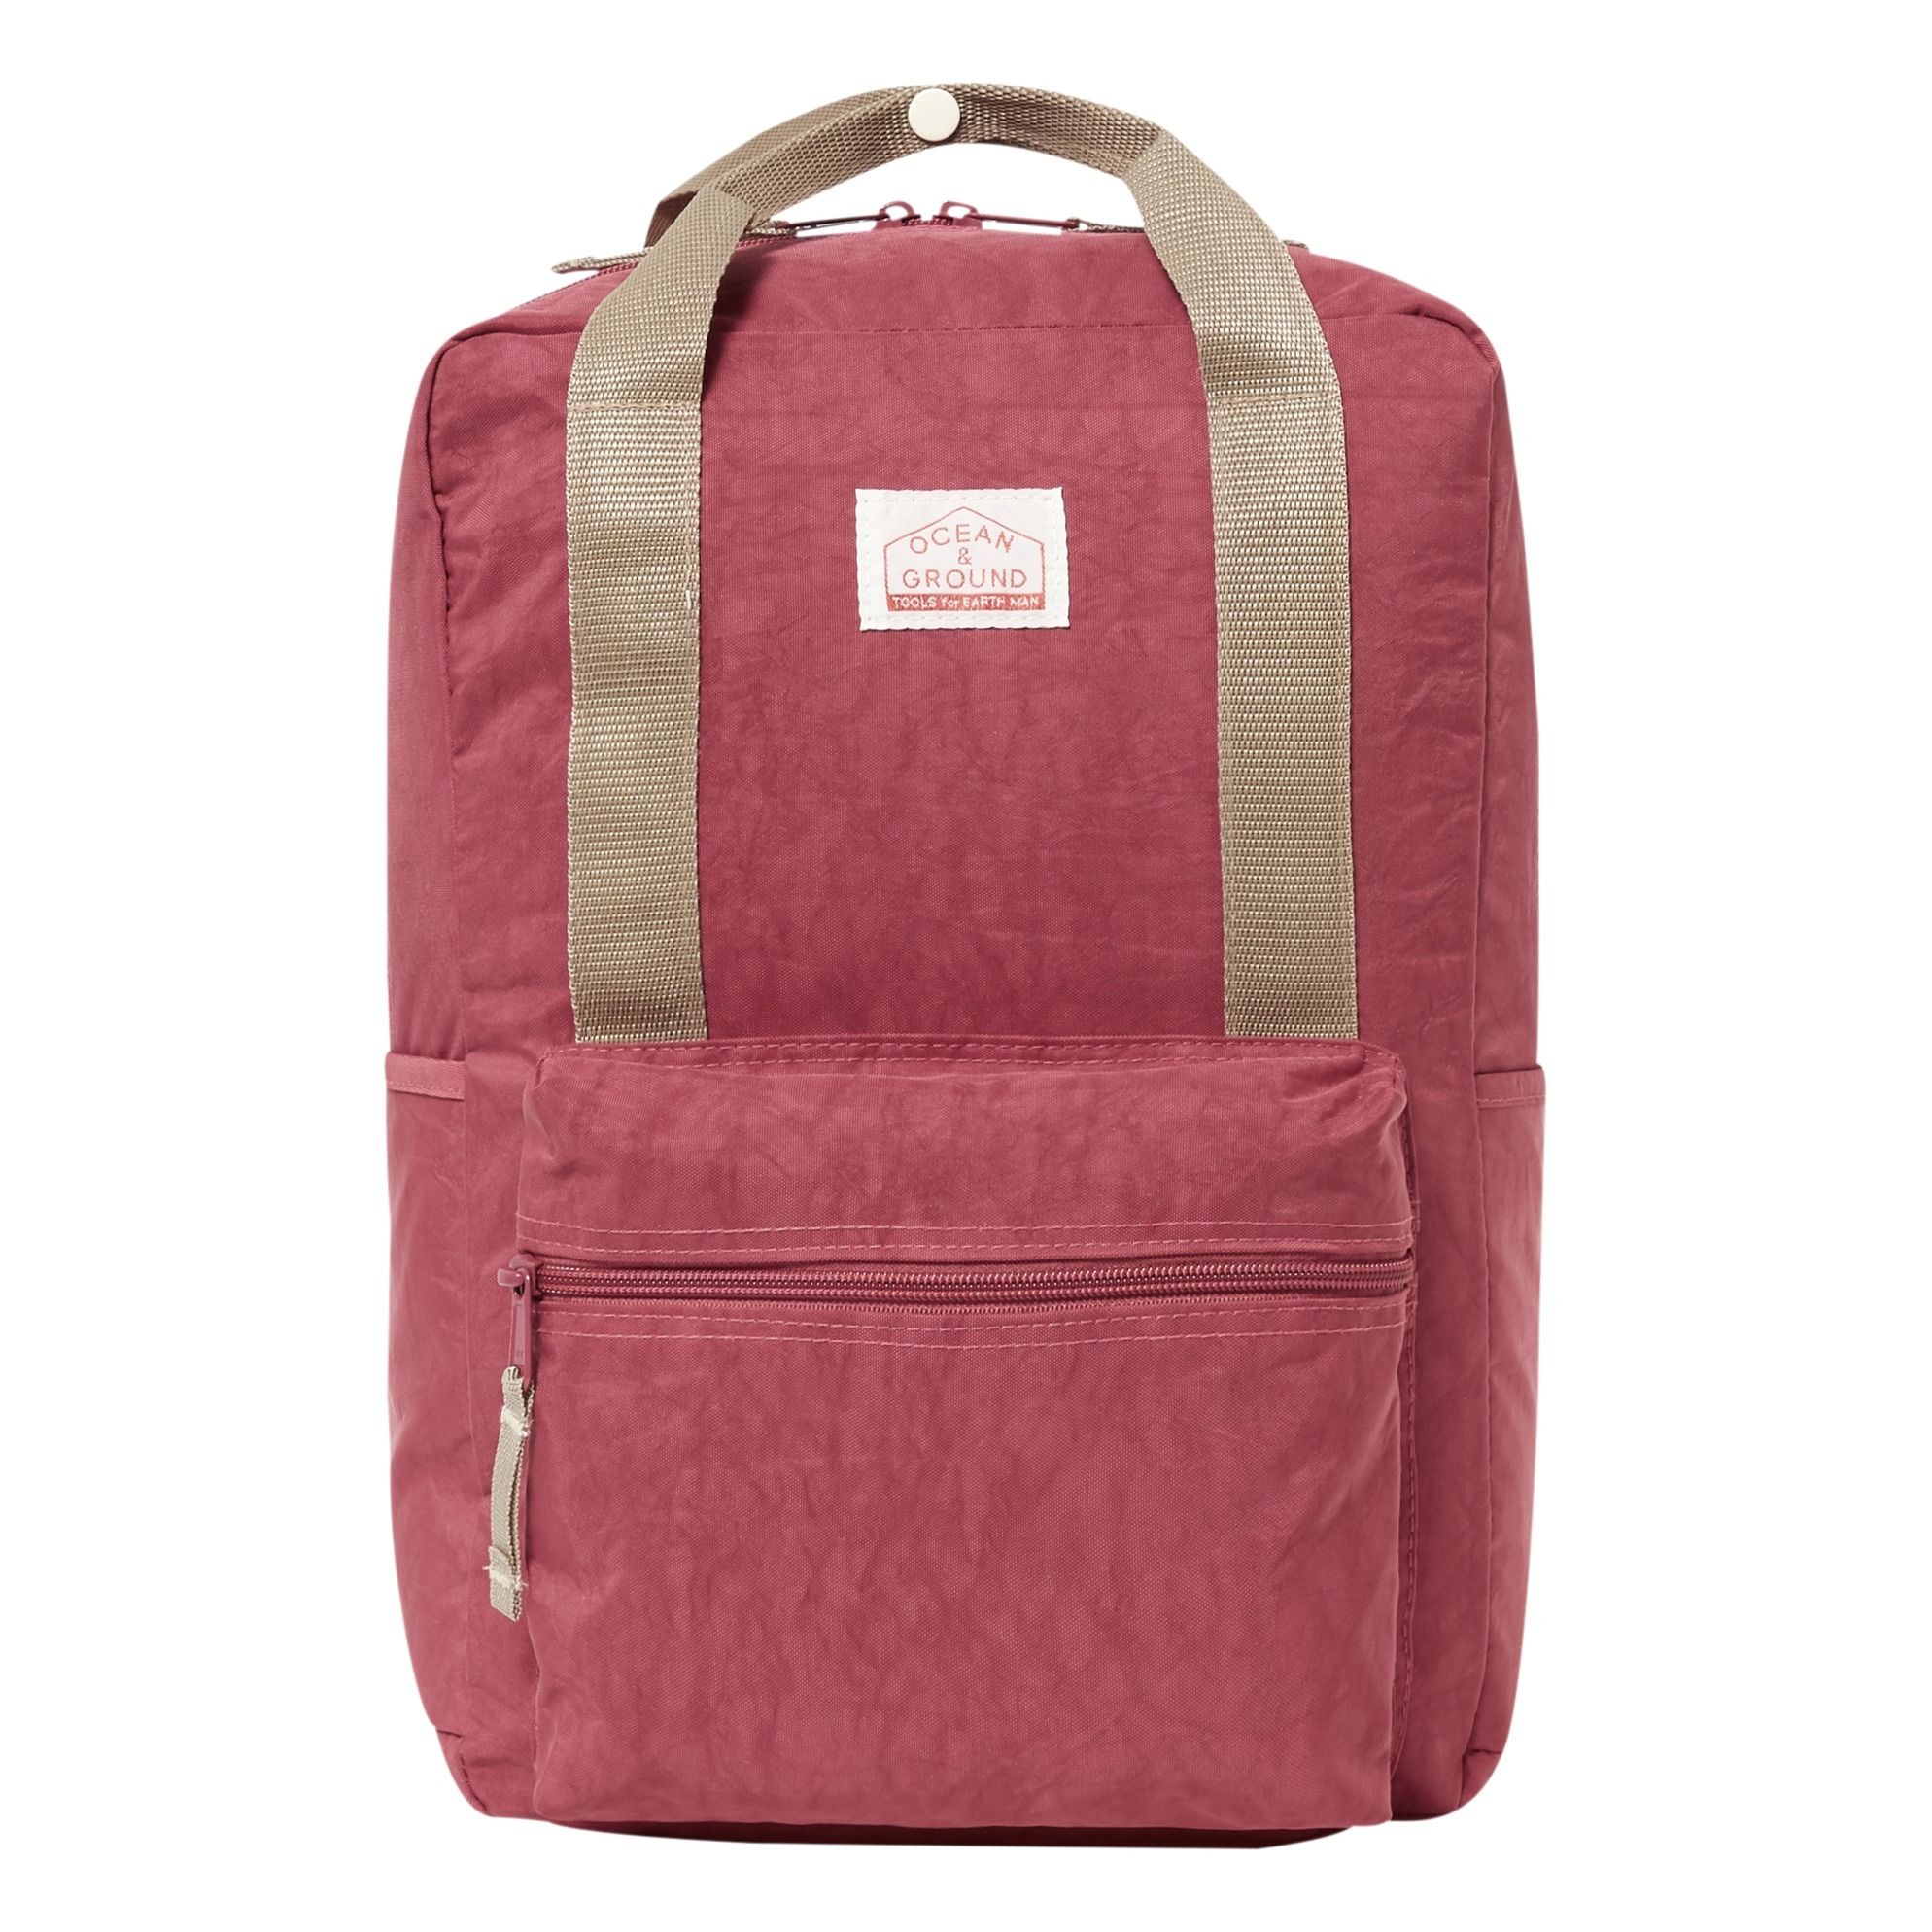 Ocean&Ground - Sac Crazy S - Fille - Rouge